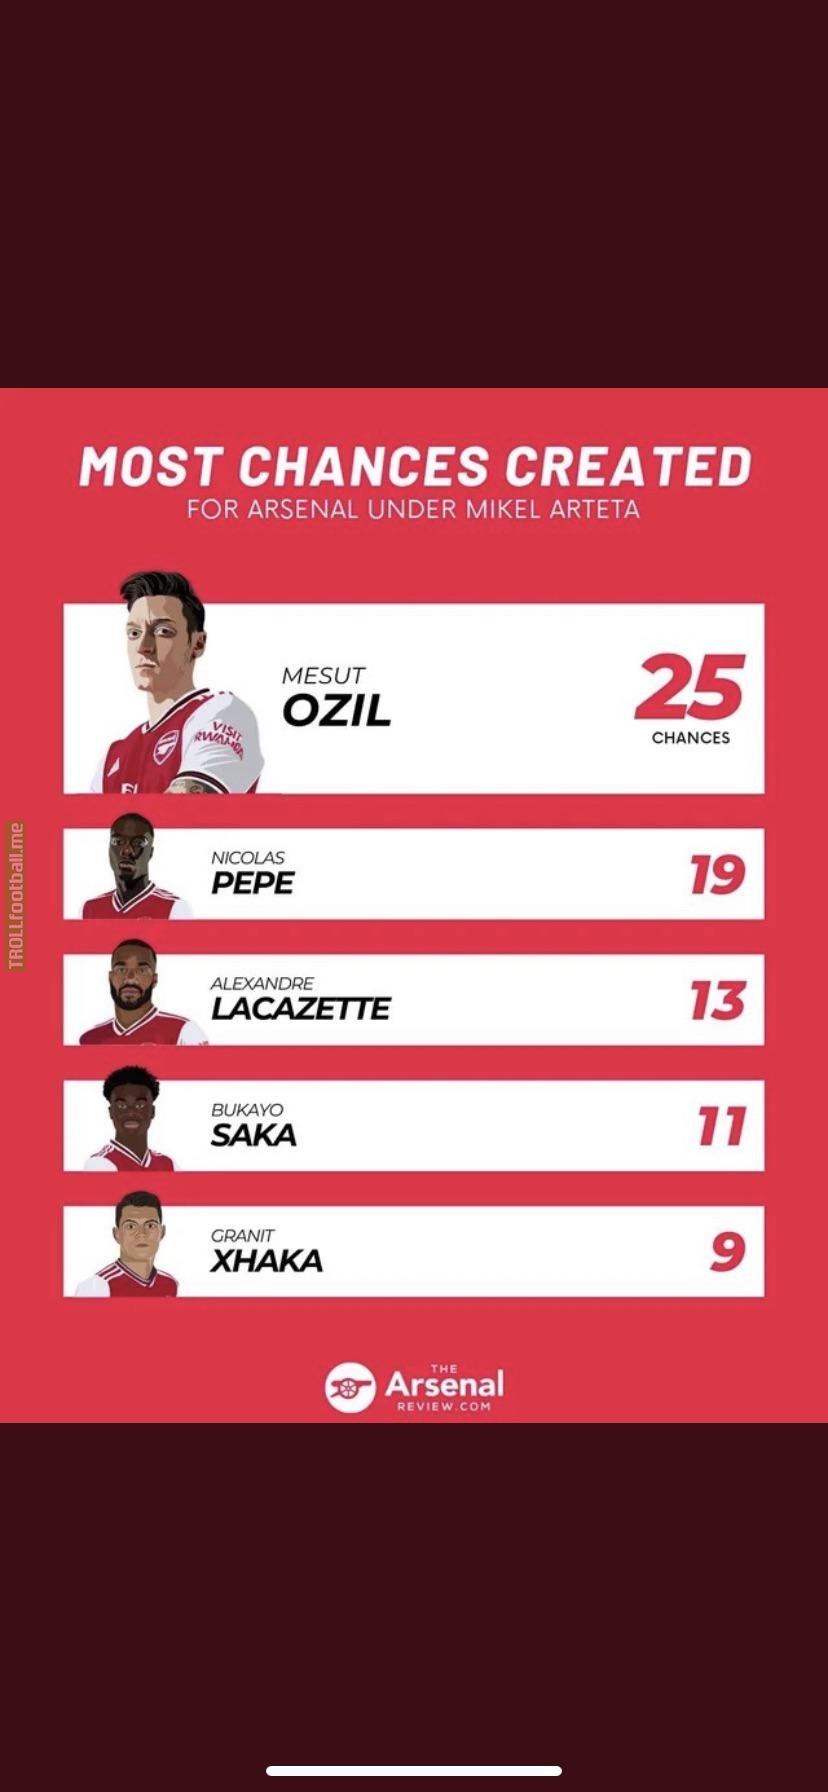 Most chances created for Arsenal under Mikel Arteta